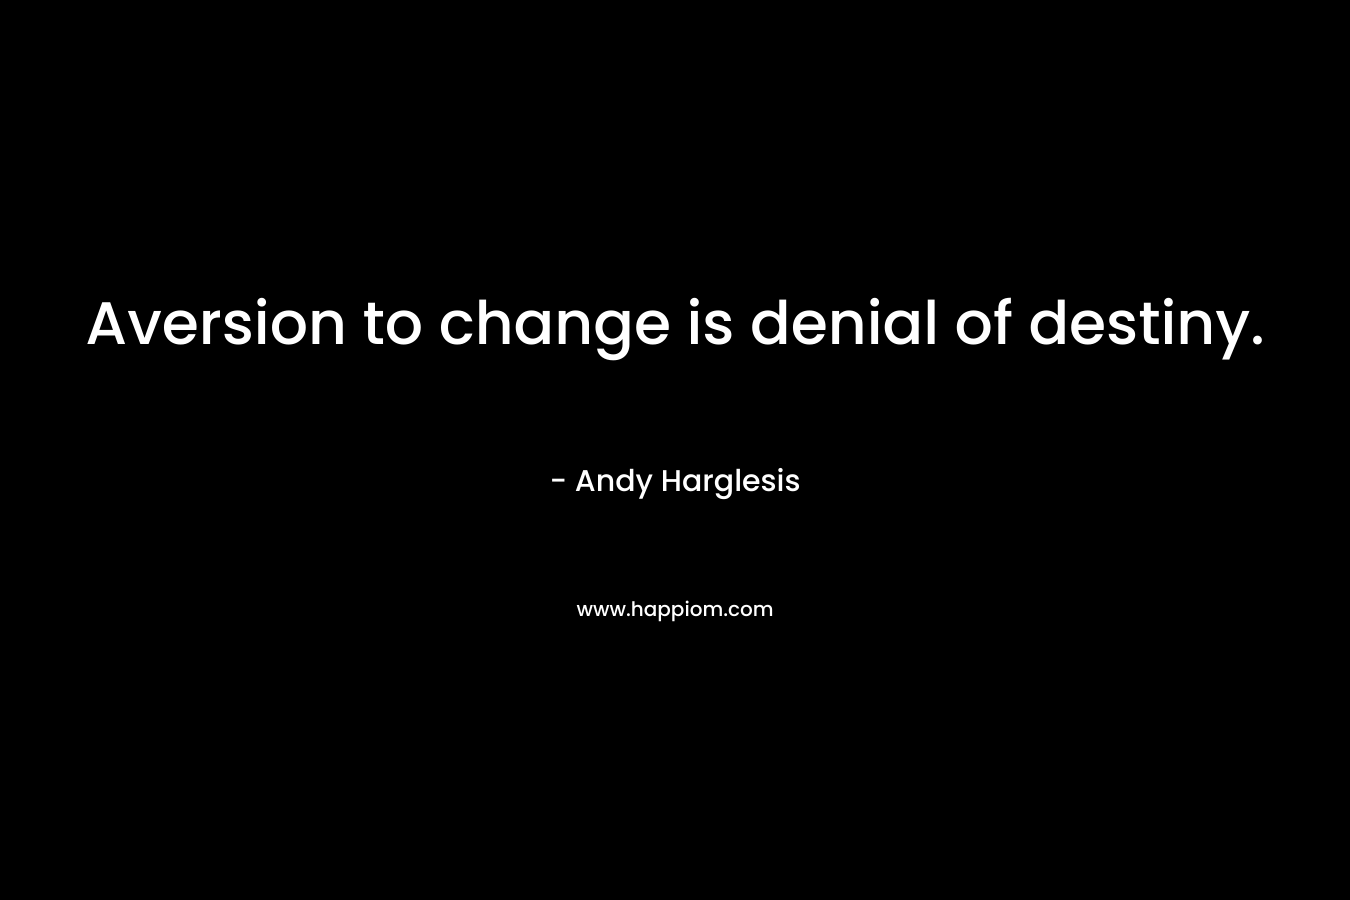 Aversion to change is denial of destiny.